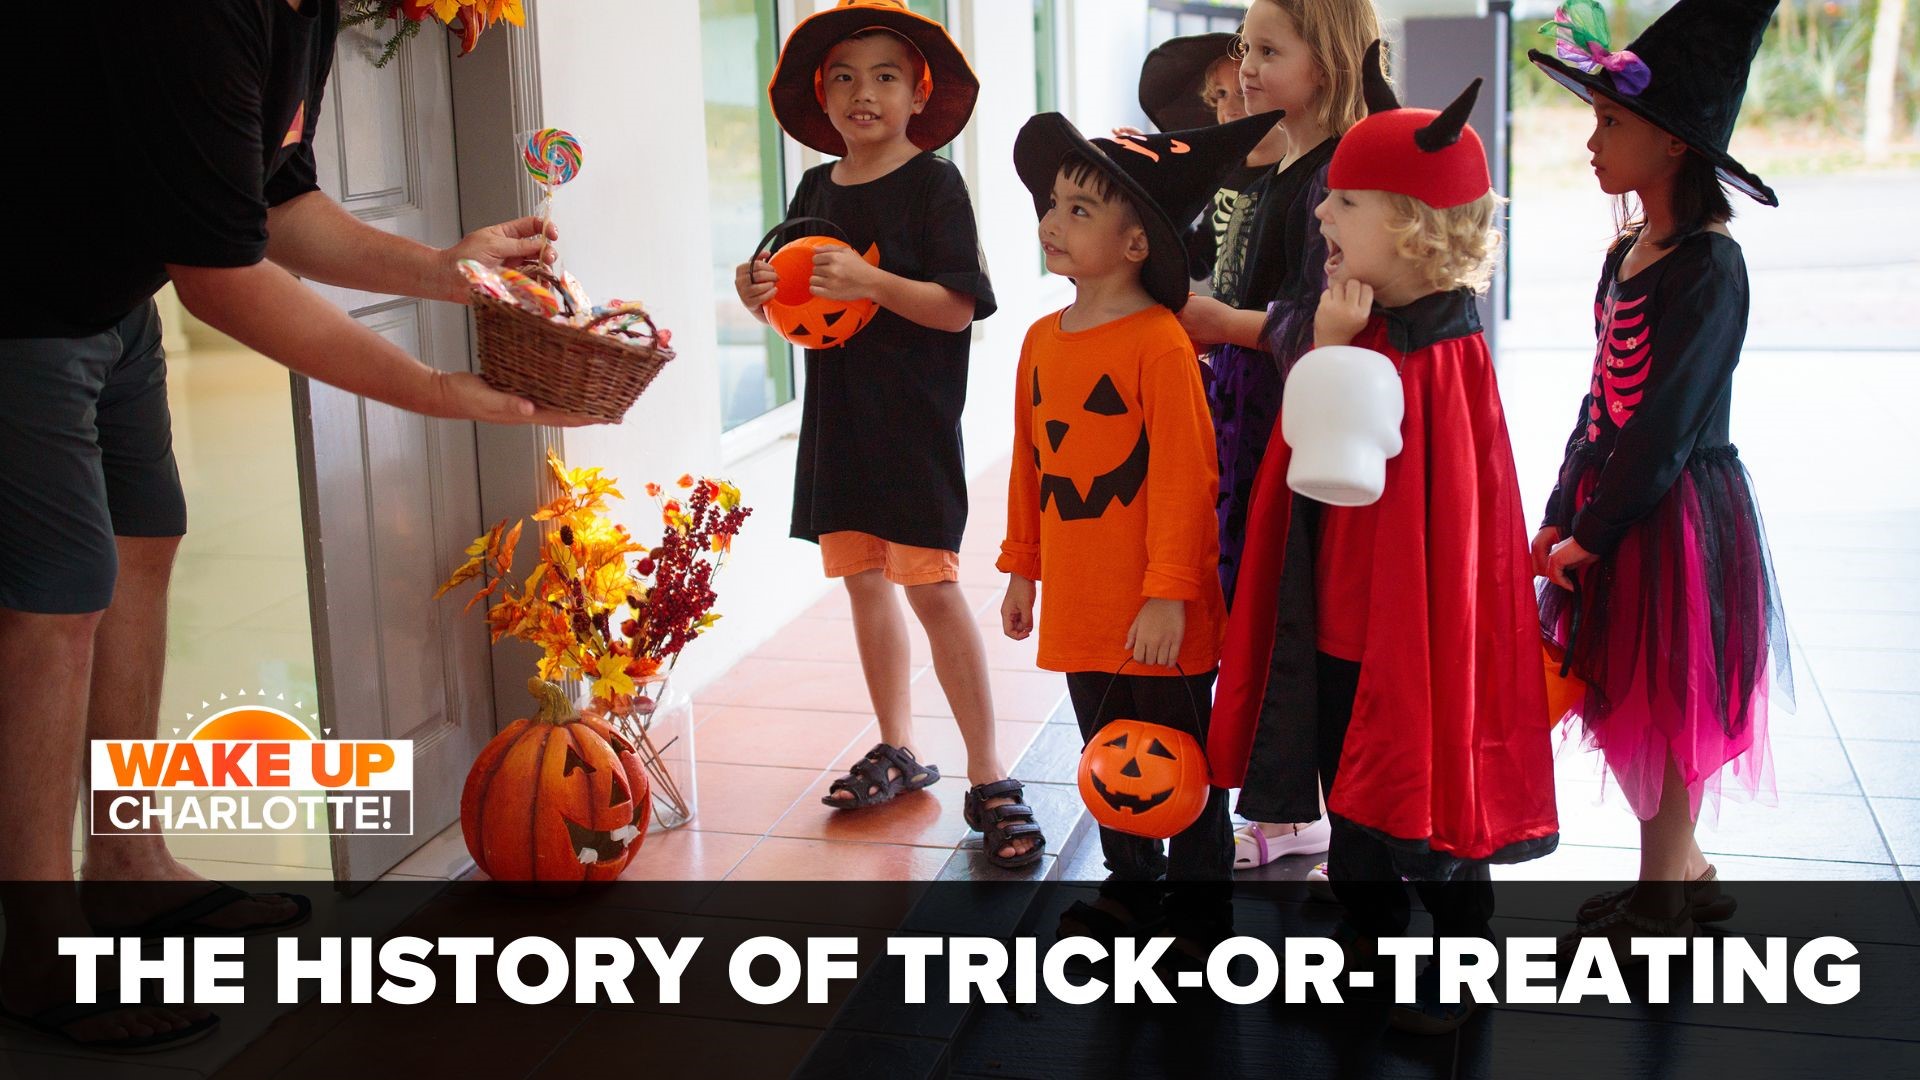 Little ghouls and goblins will be out in search of a bucket full of treats on Halloween. Here's how our beloved trick-or-treating became a Halloween tradition.